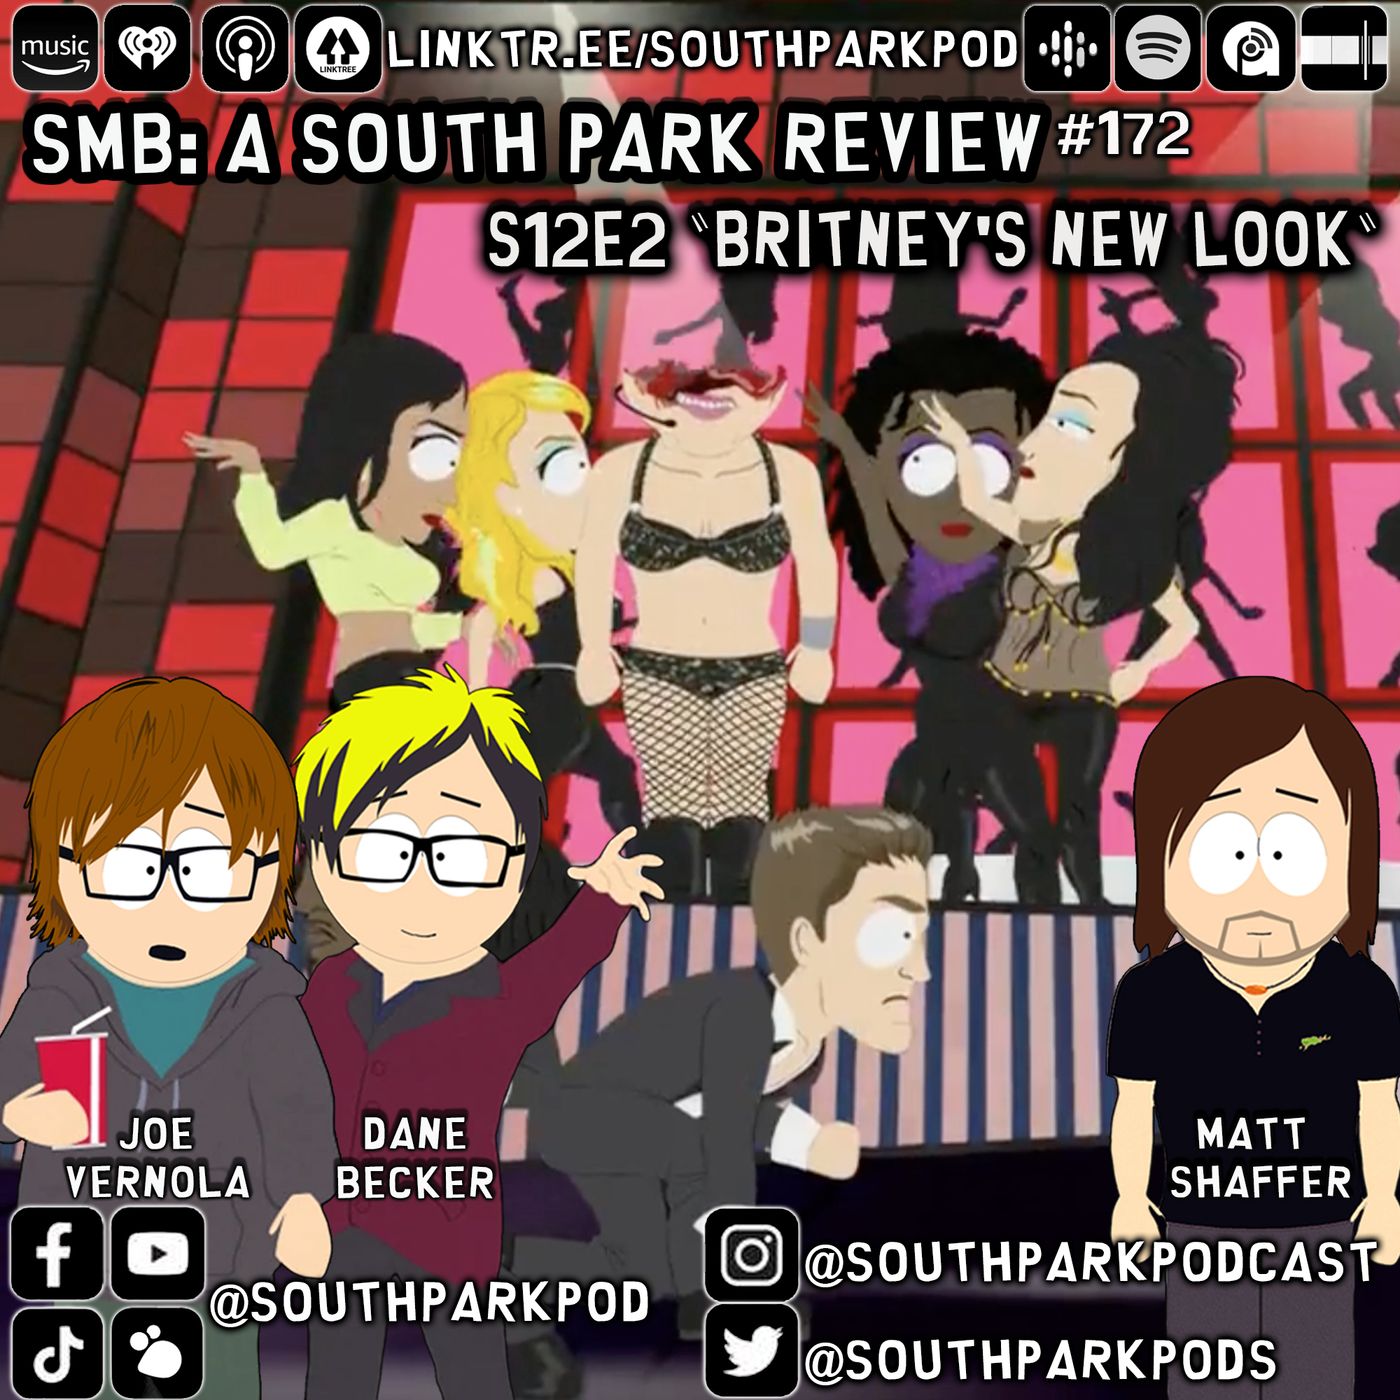 SMB #172 - S12E2 Britney’s New Look - ”Not Me, I’m A Squirrel!”